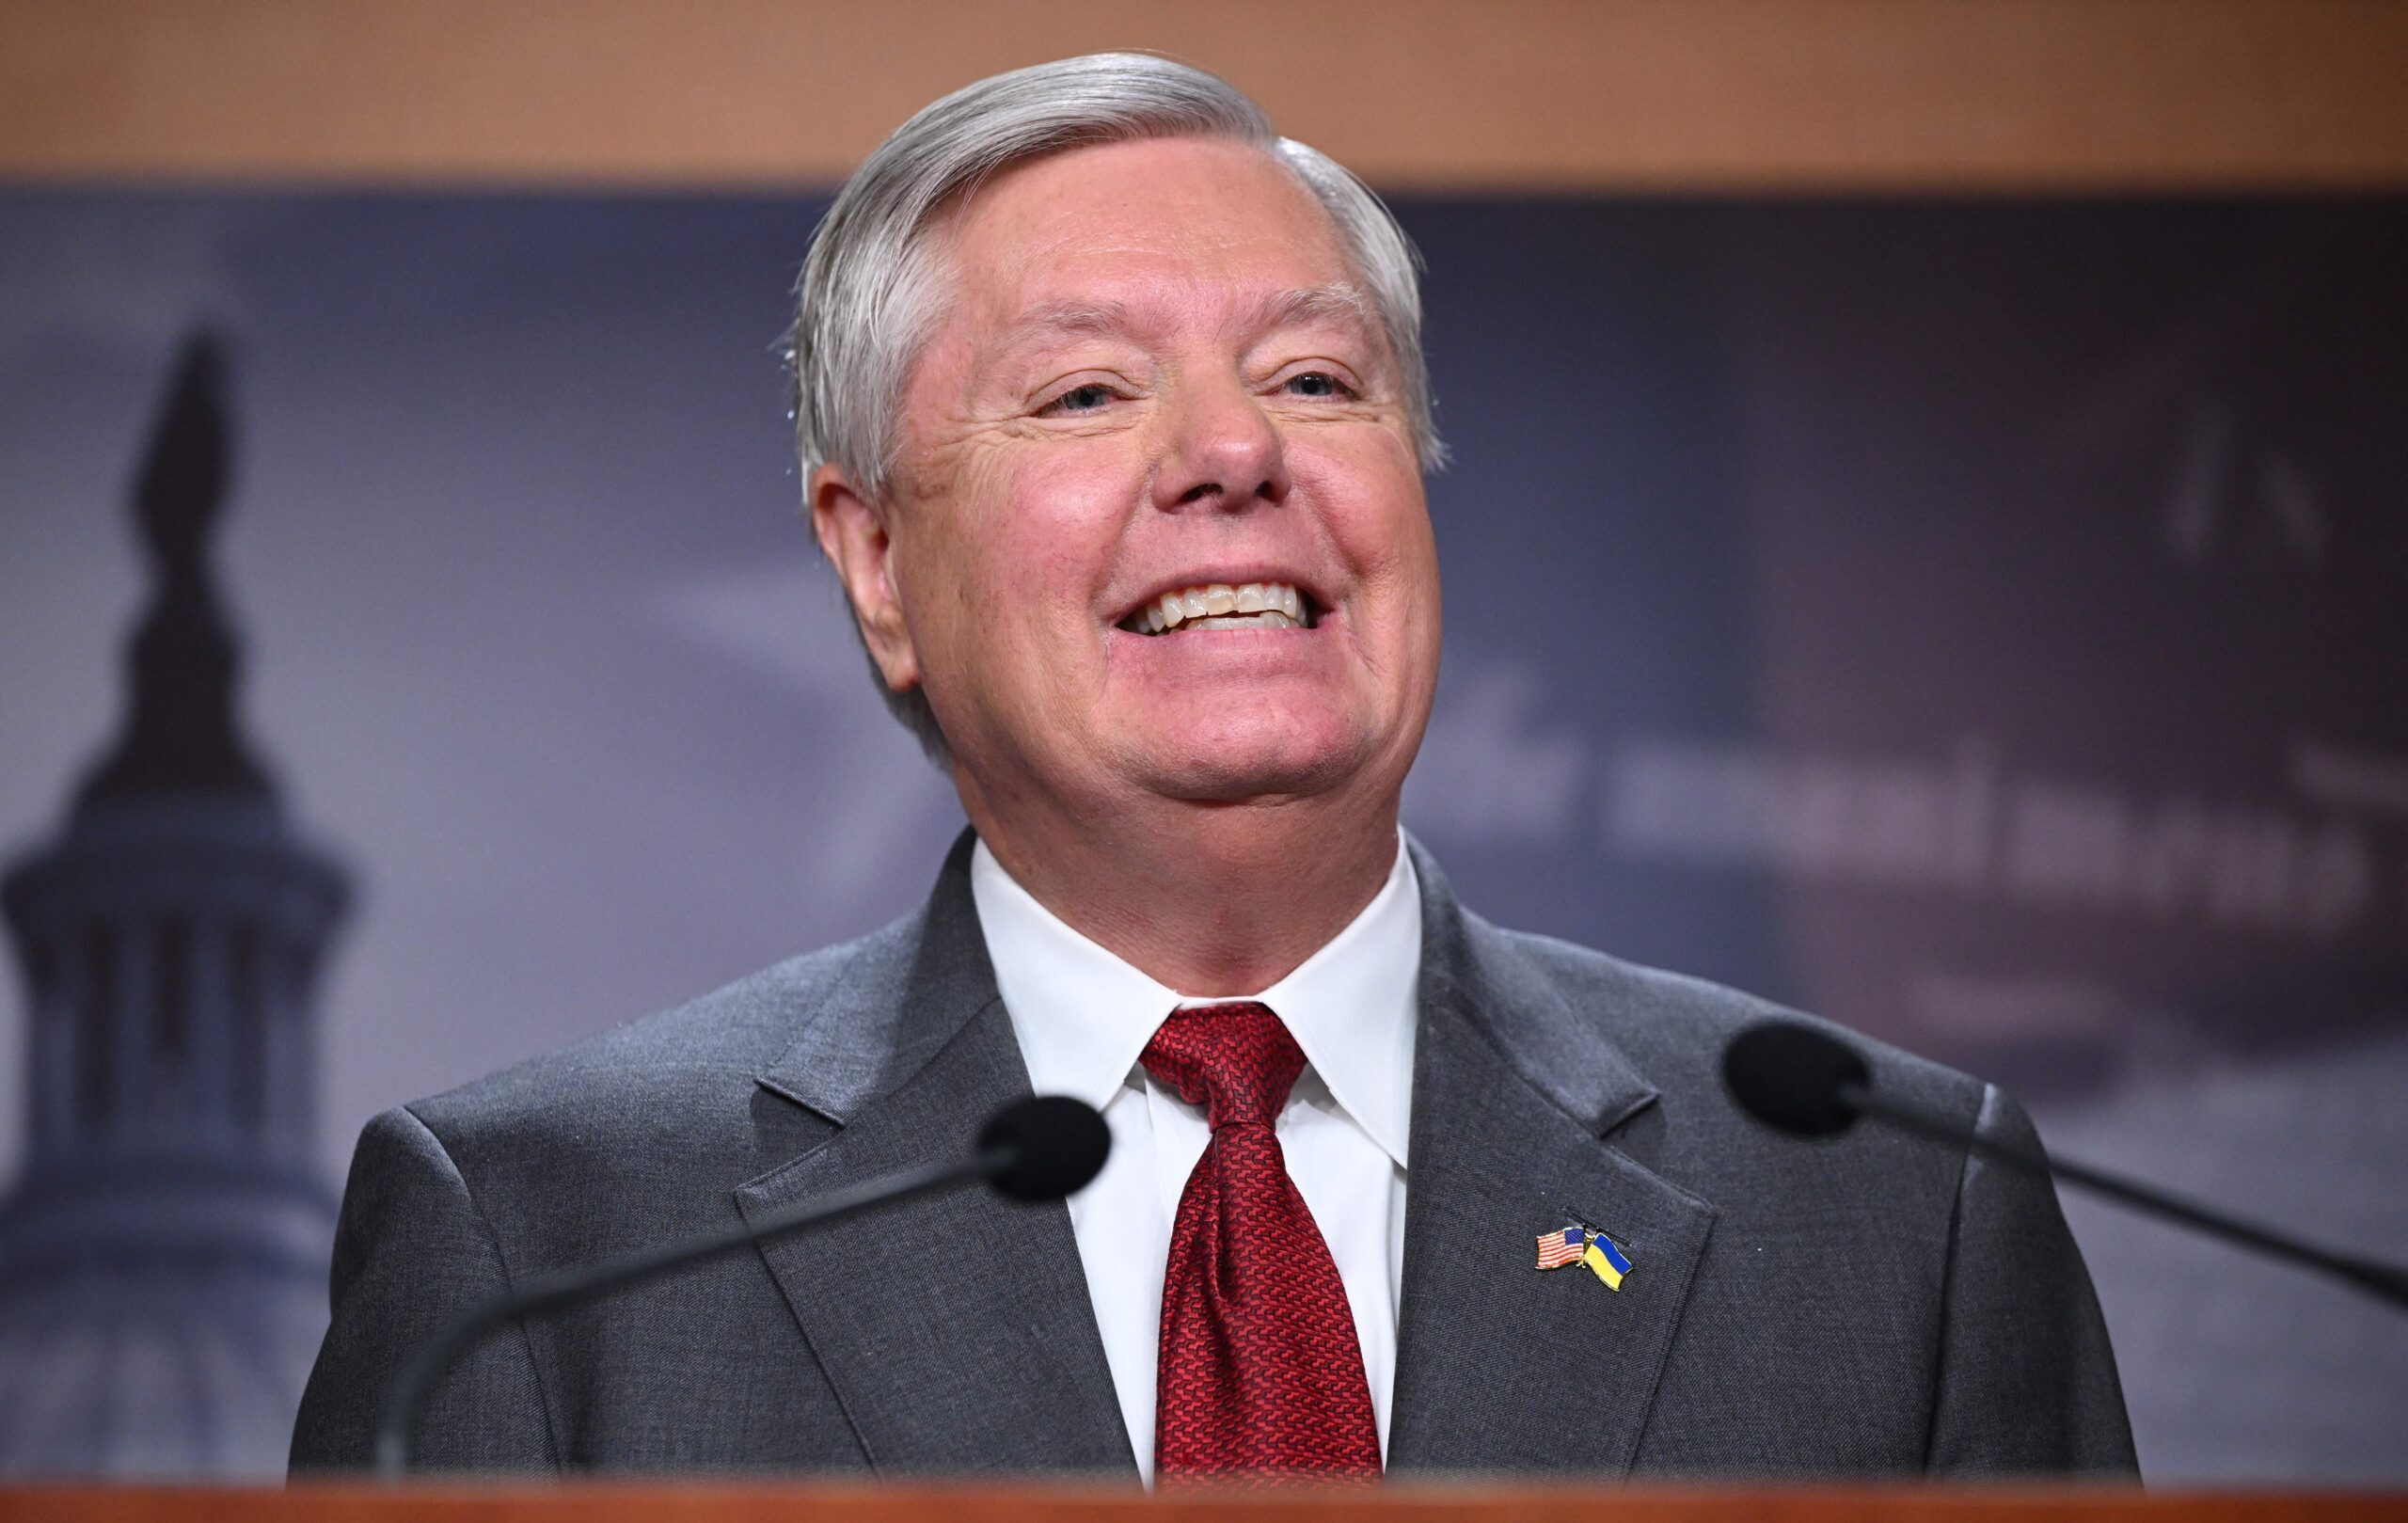 Lindsey Graham: The Only Way to Avoid World War III Is to Start It